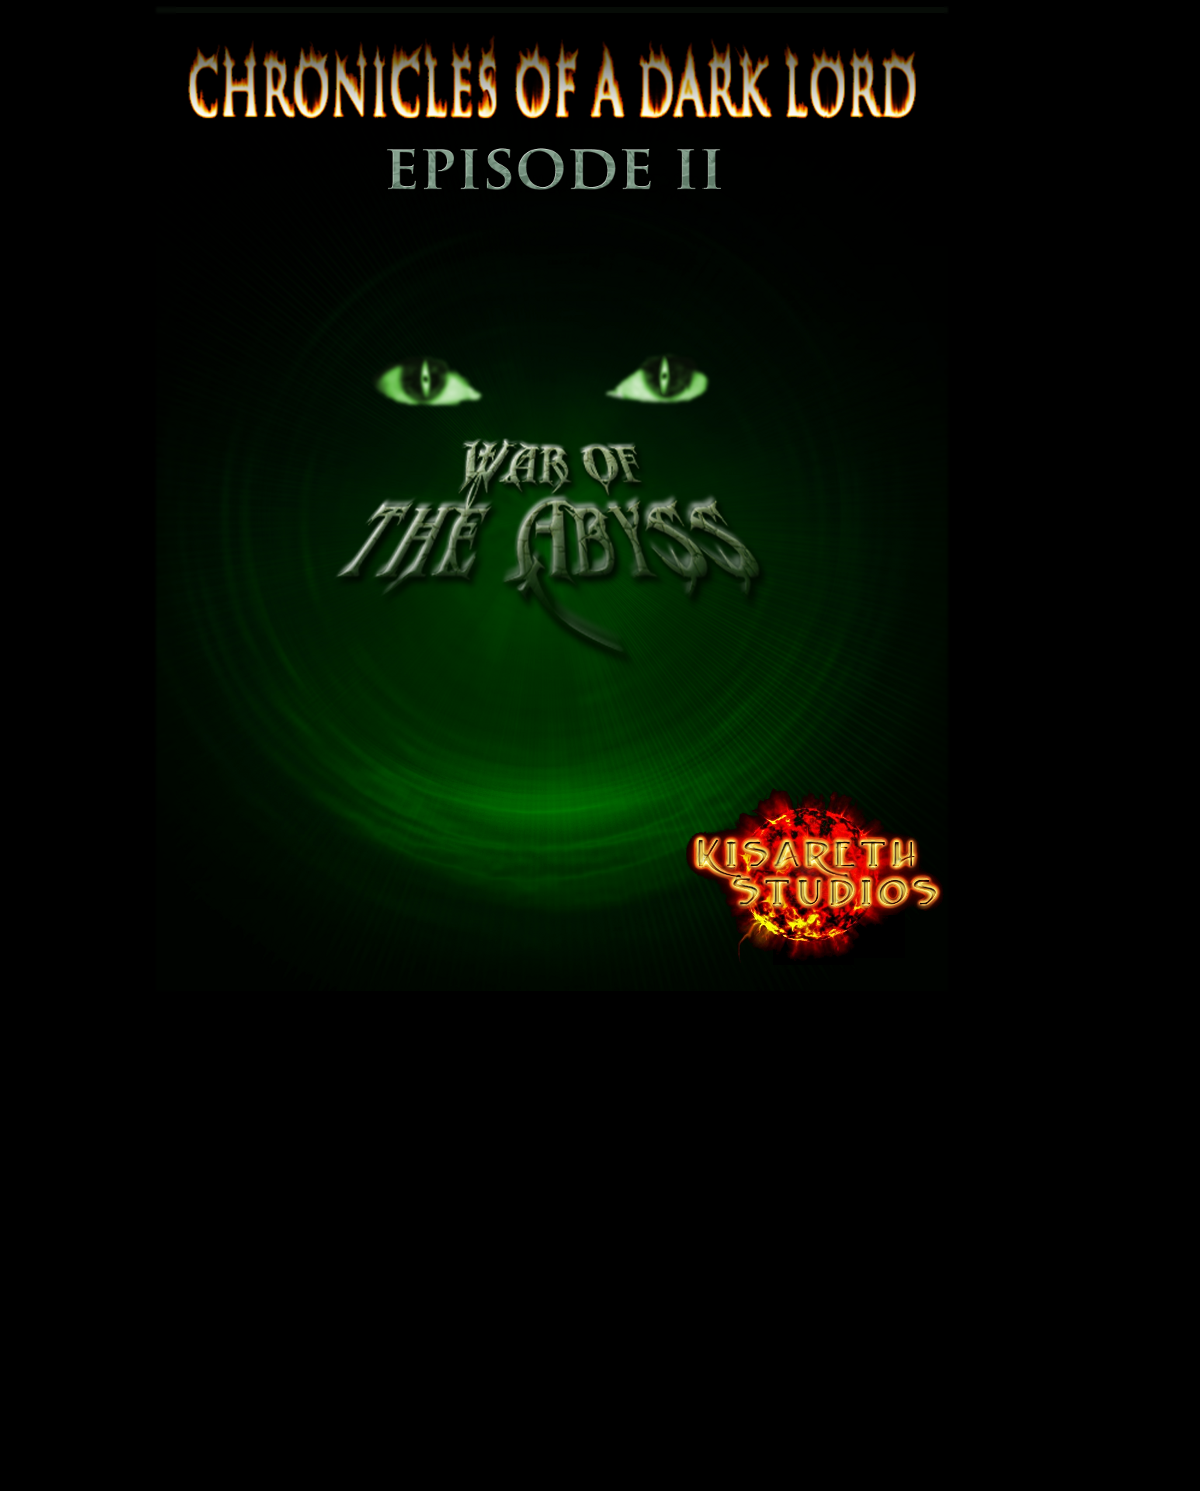 Image of Chronicles of a Dark Lord: Episode 2 War of The Abyss